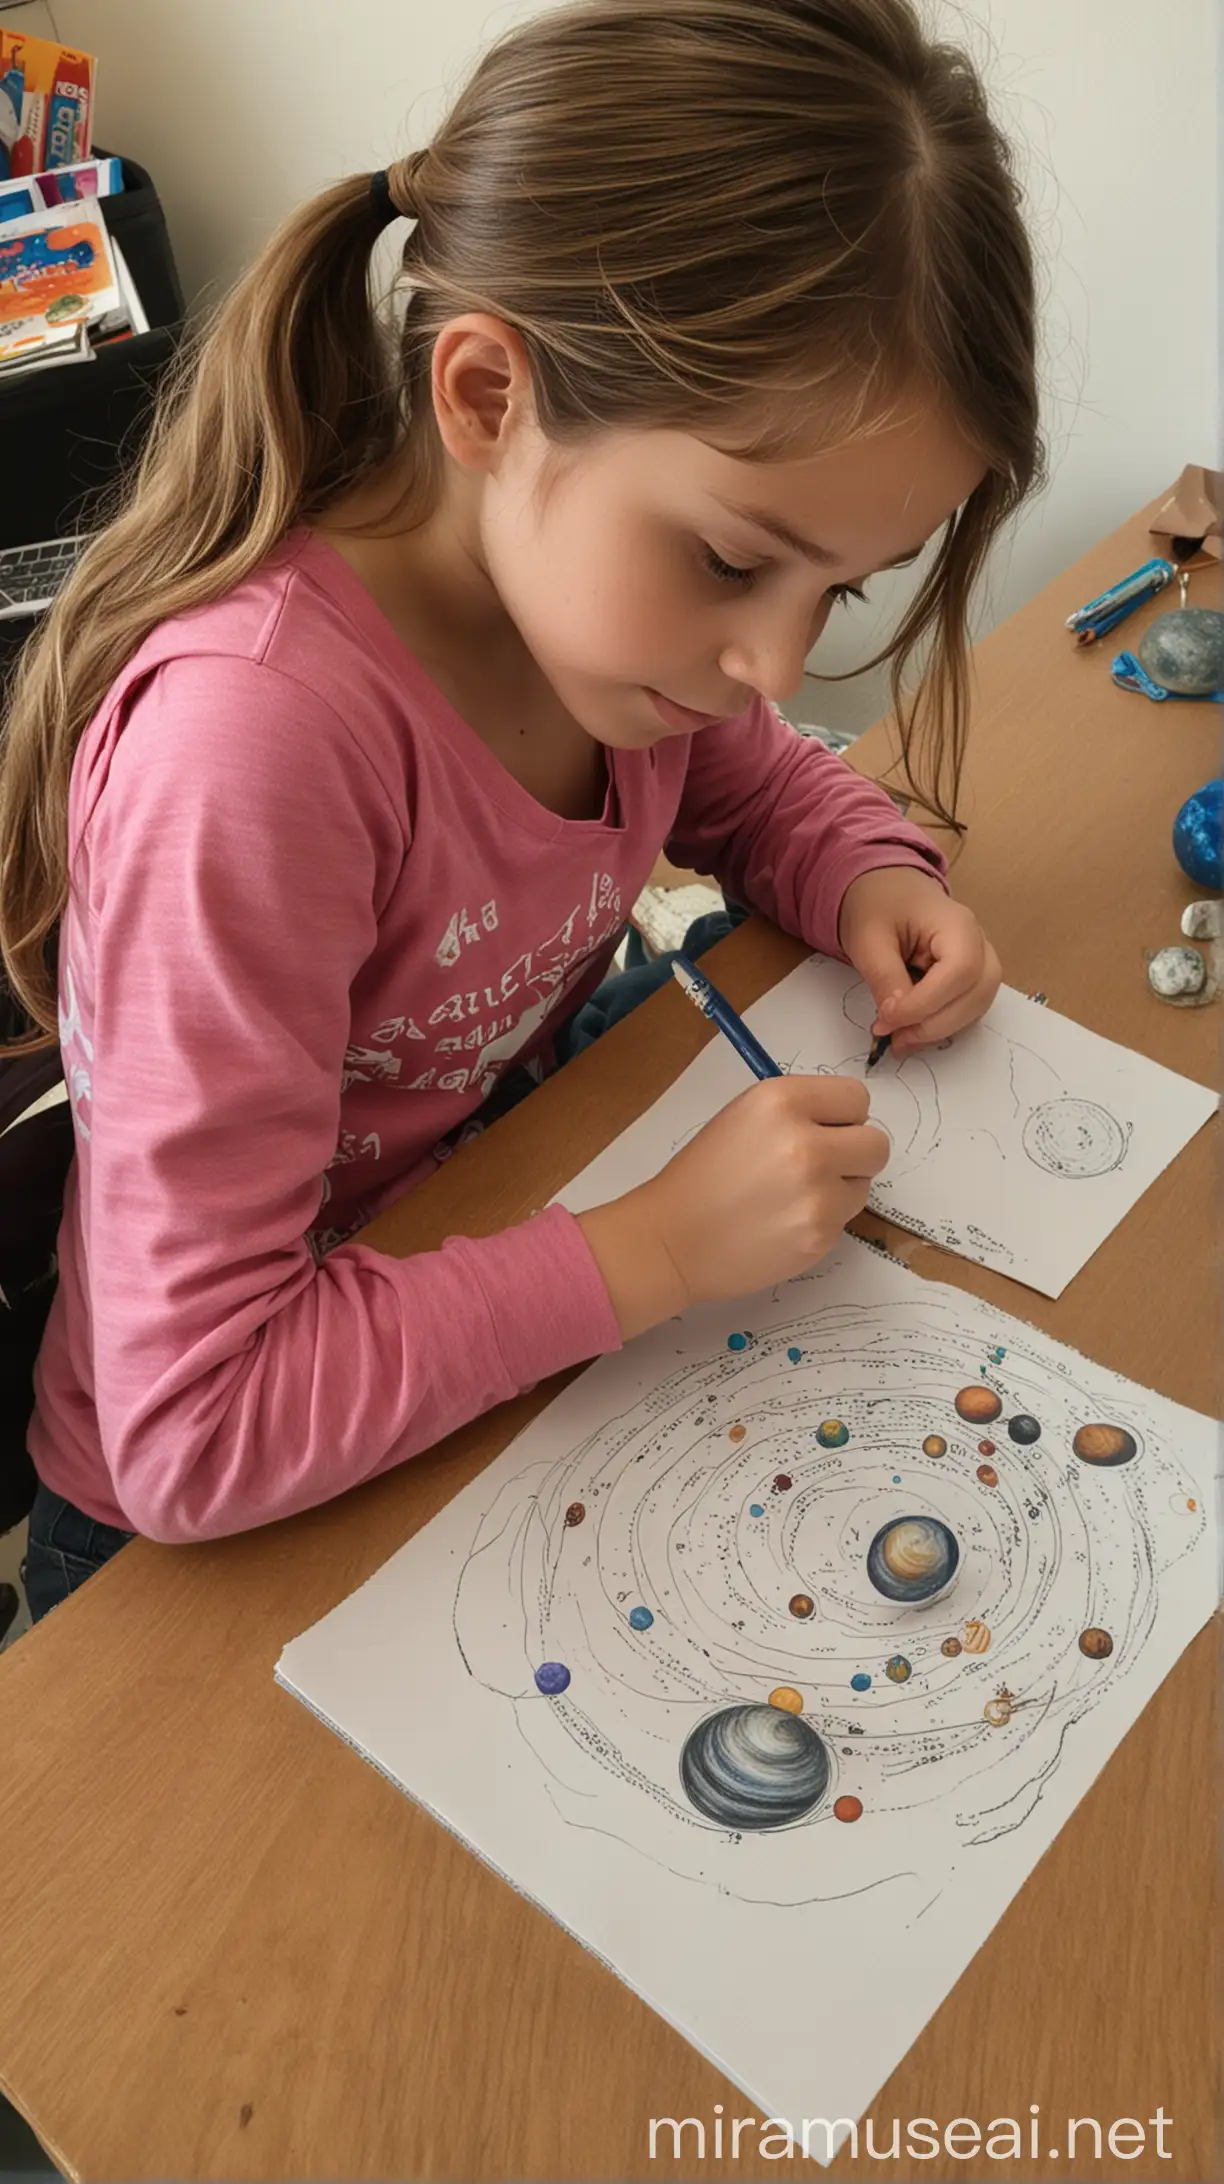 An elementary school student doing homework. She is drawing, and has a picture book of the planets in our solar system.